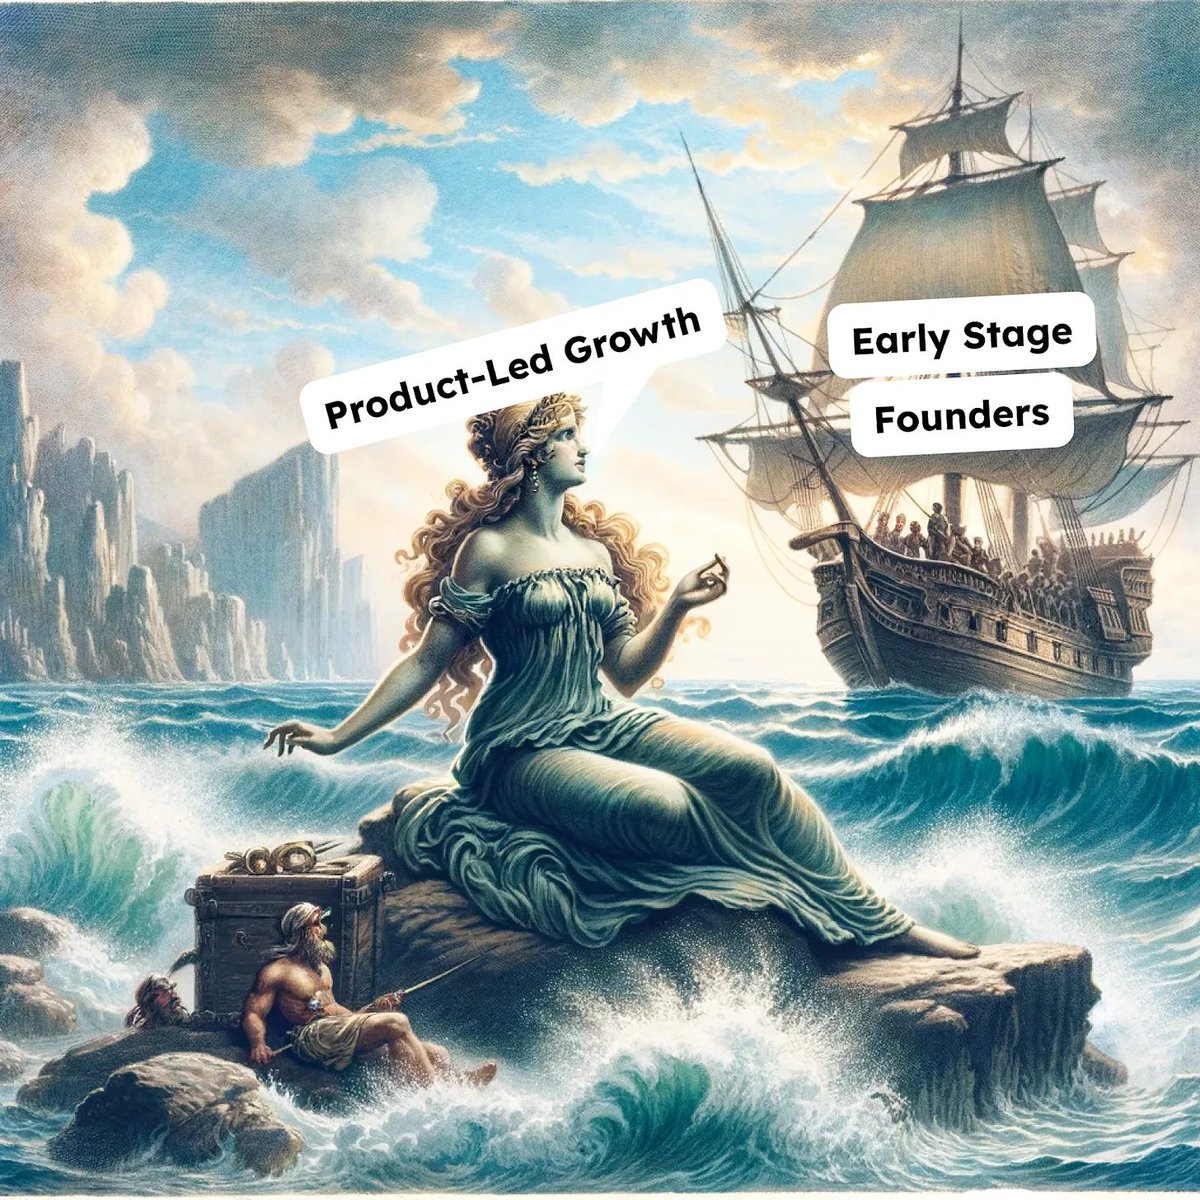 Should You Use PLG as a Seed Startup? Important post from @sendspark Founder @BethStachenfeld that all early stage founders should read when thinking about GTM notoriousplg.substack.com/p/nplg-12524-s…